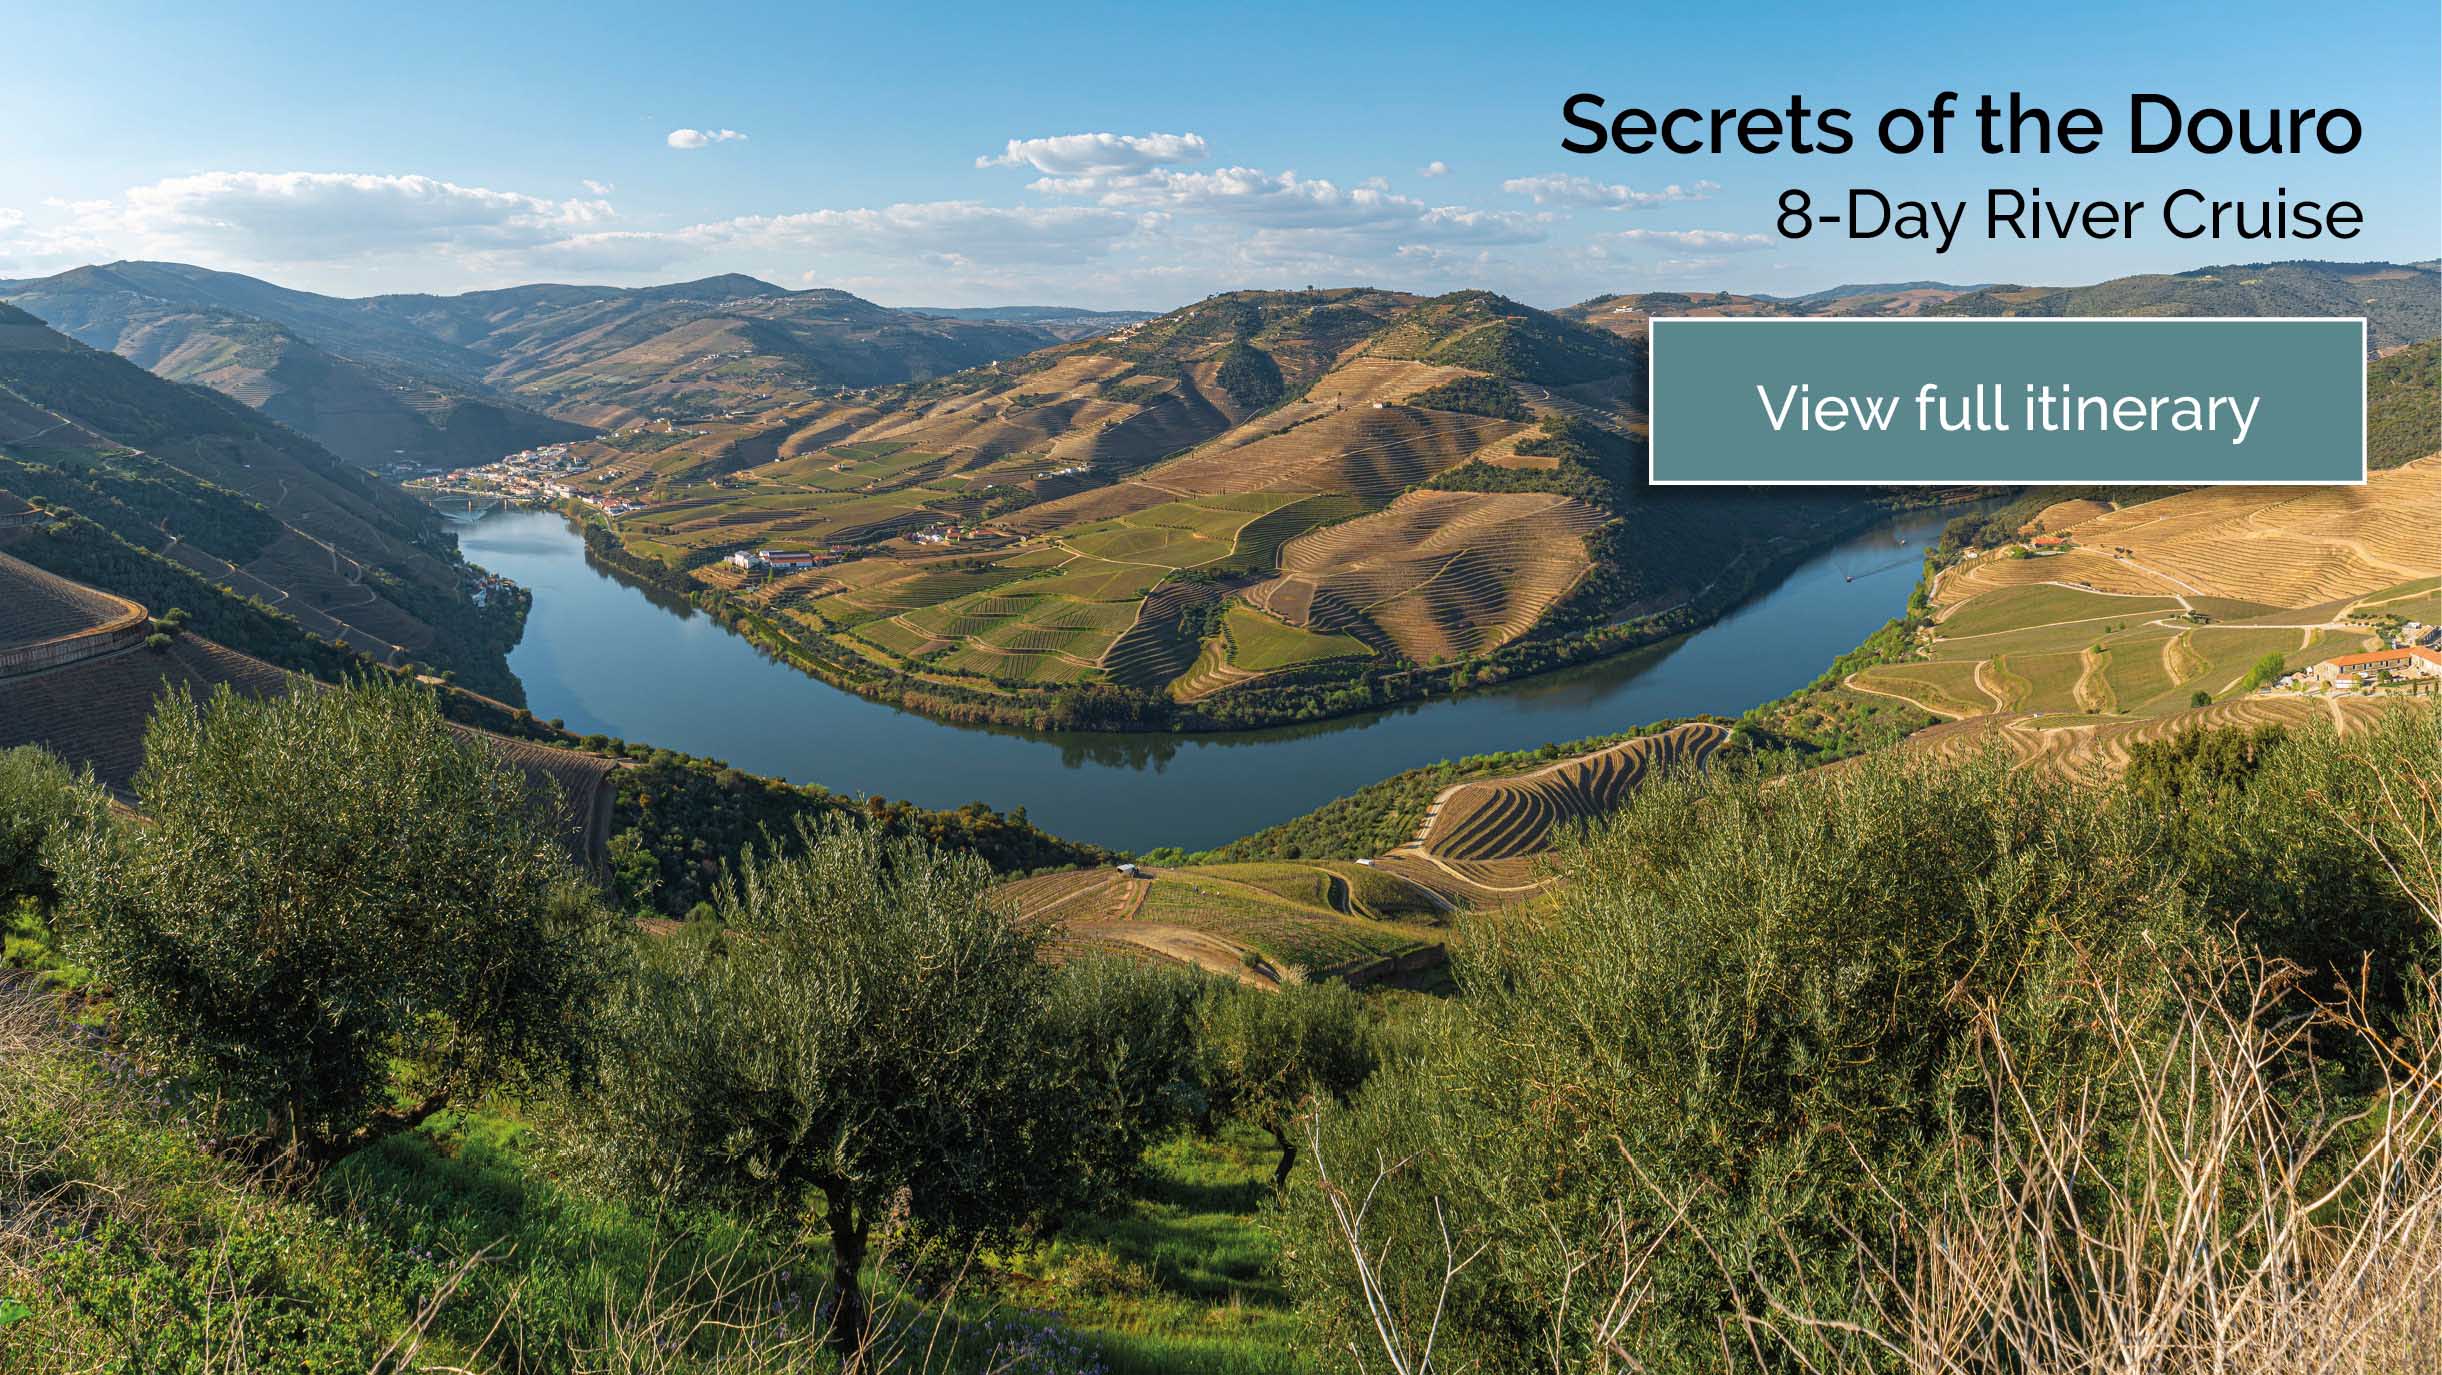 view the full Secrets of the Douro 8-Day River Cruise itinerary here 